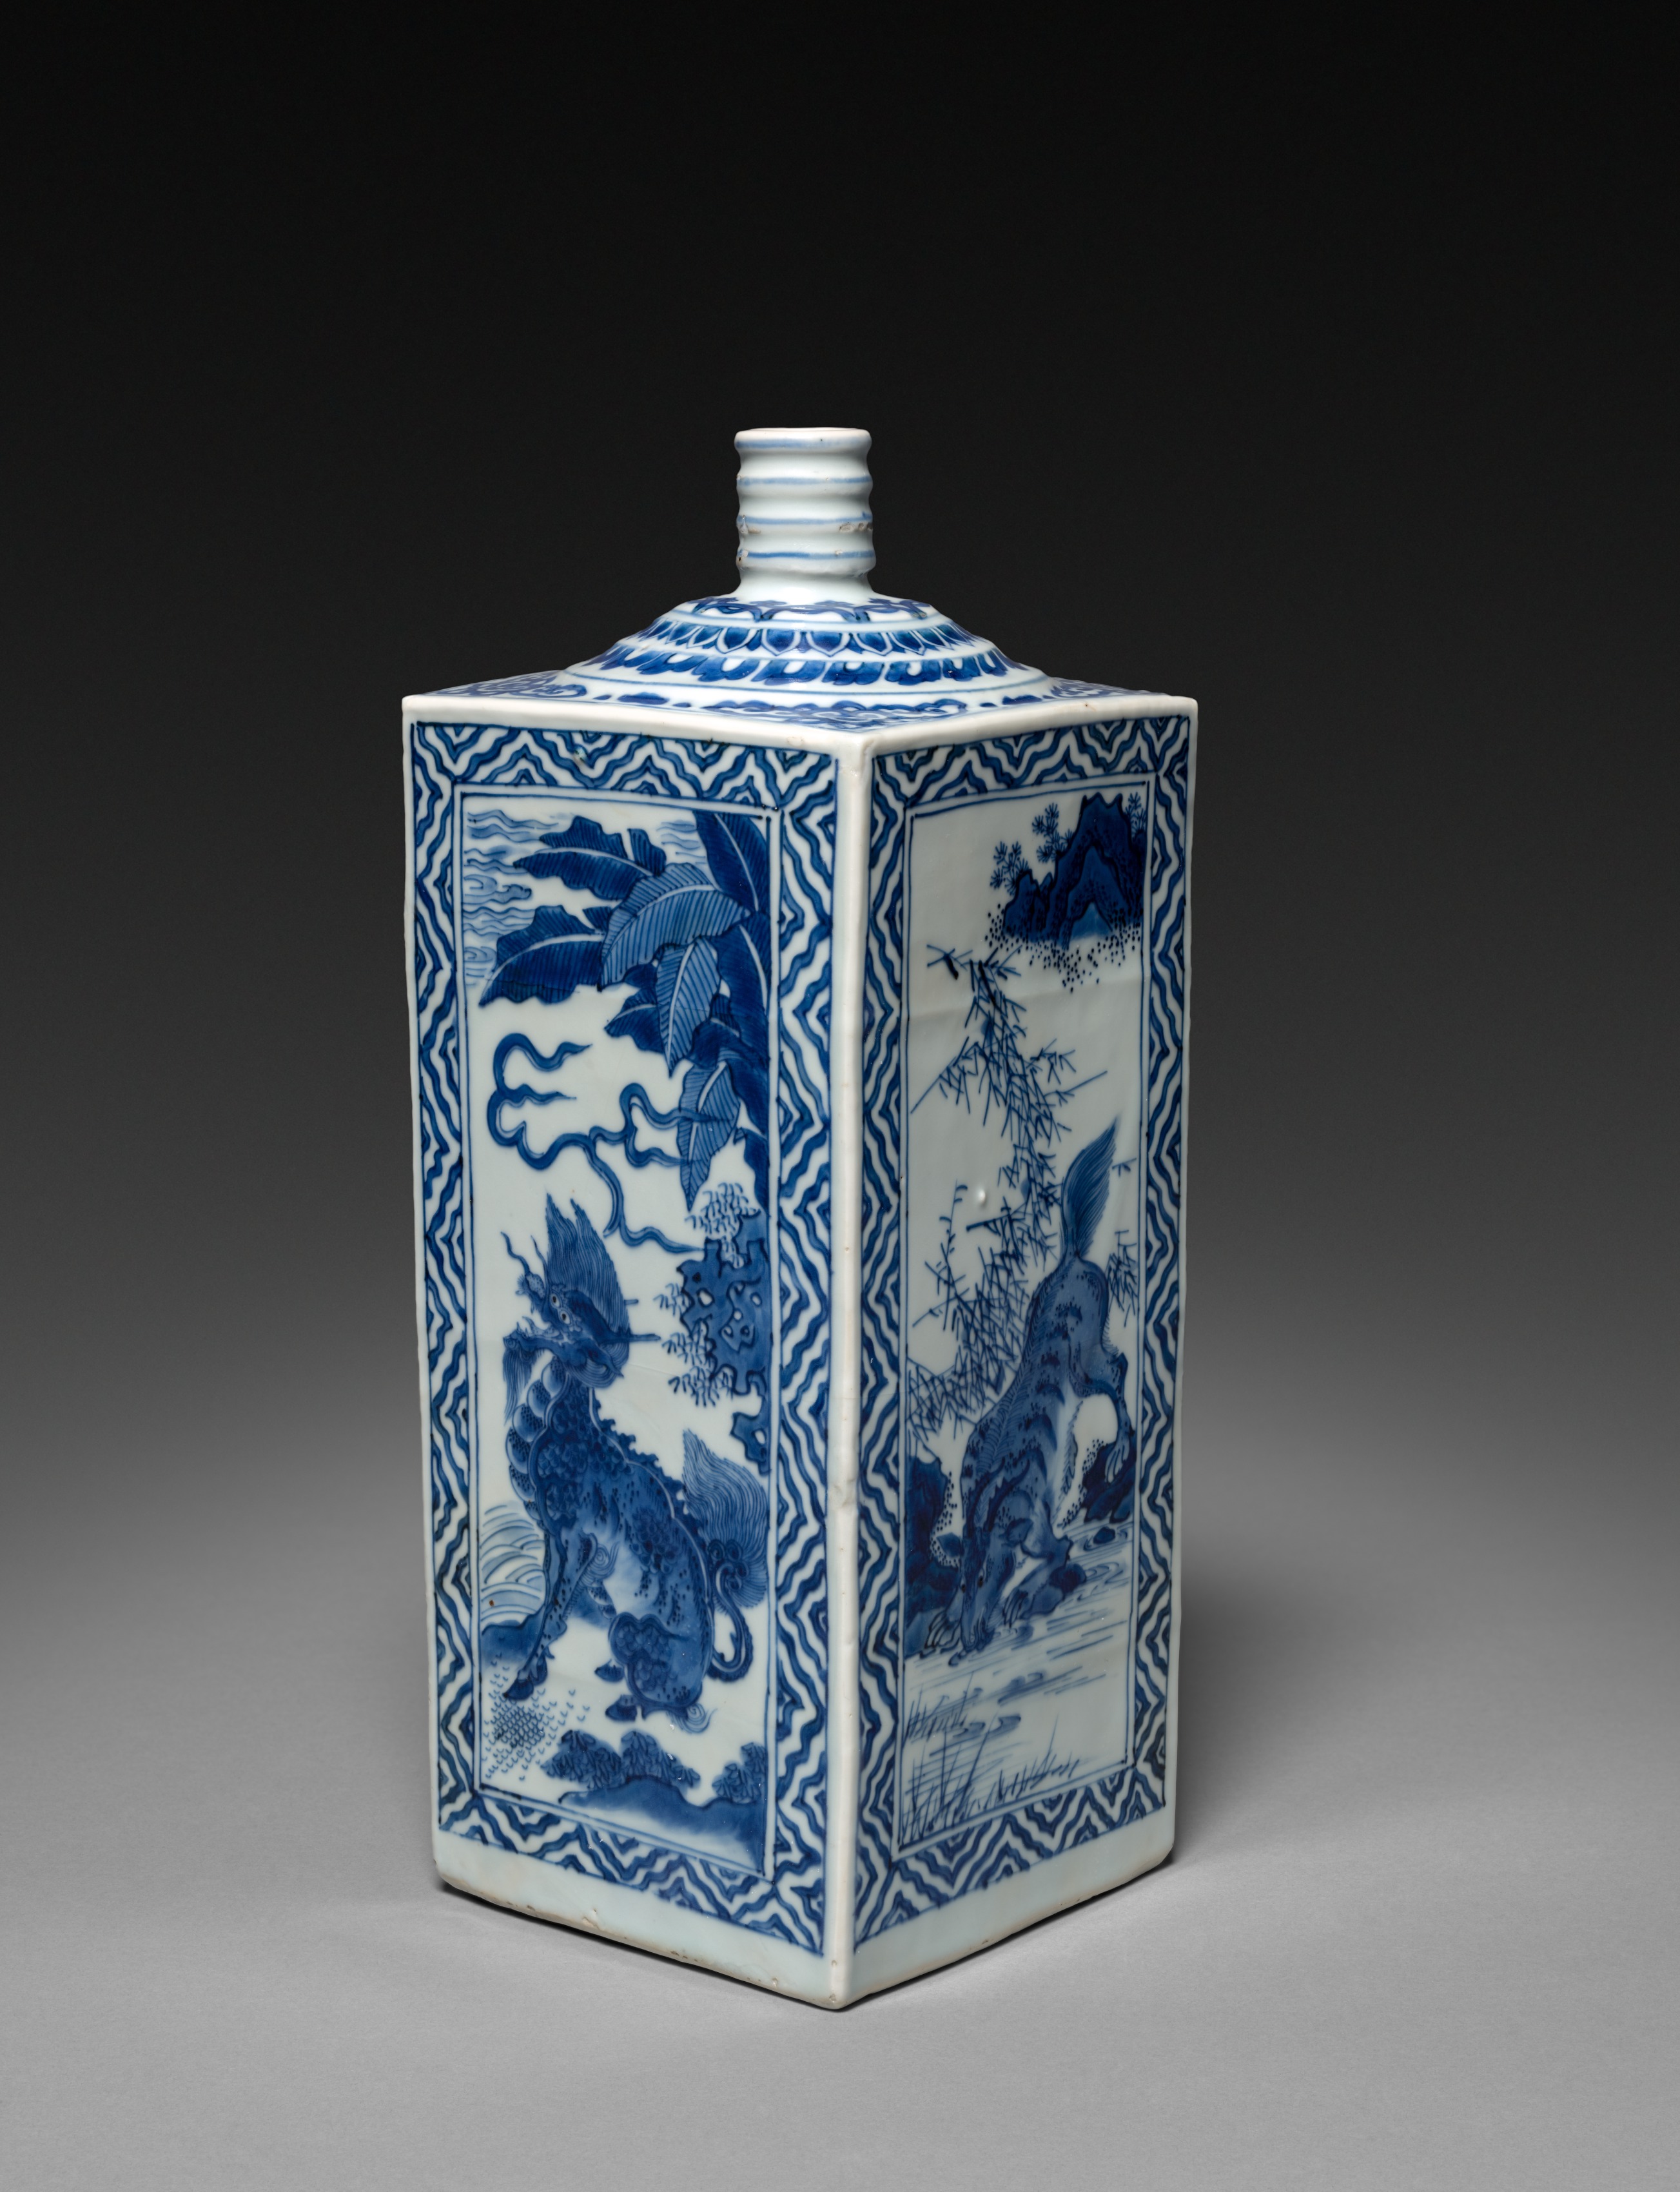 Transitional Blue-and-White Square Bottle